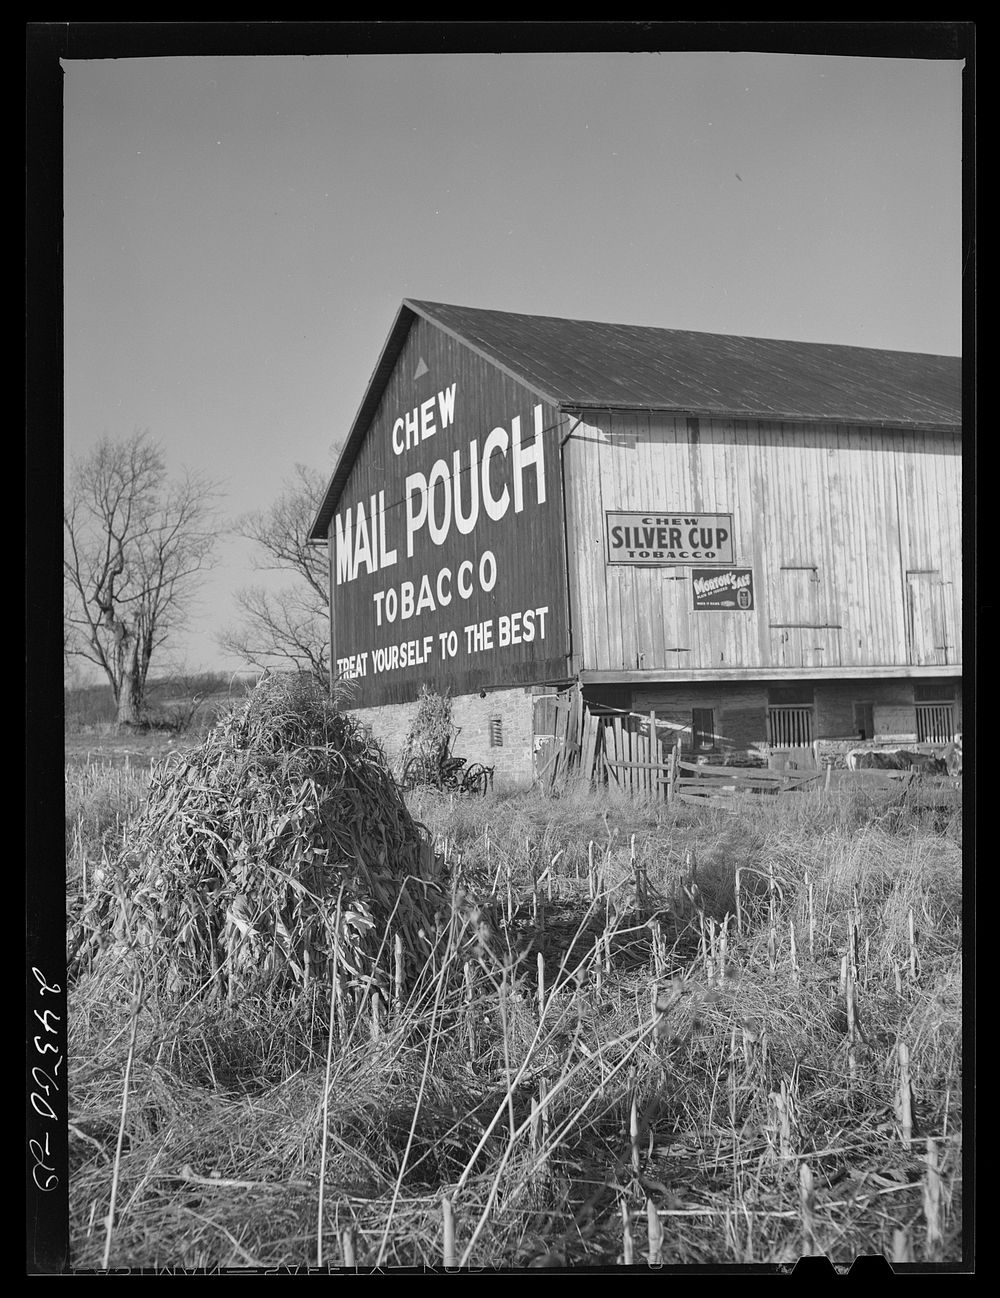 Dutch barn, Lancaster County, Pennsylvania. Sourced from the Library of Congress.